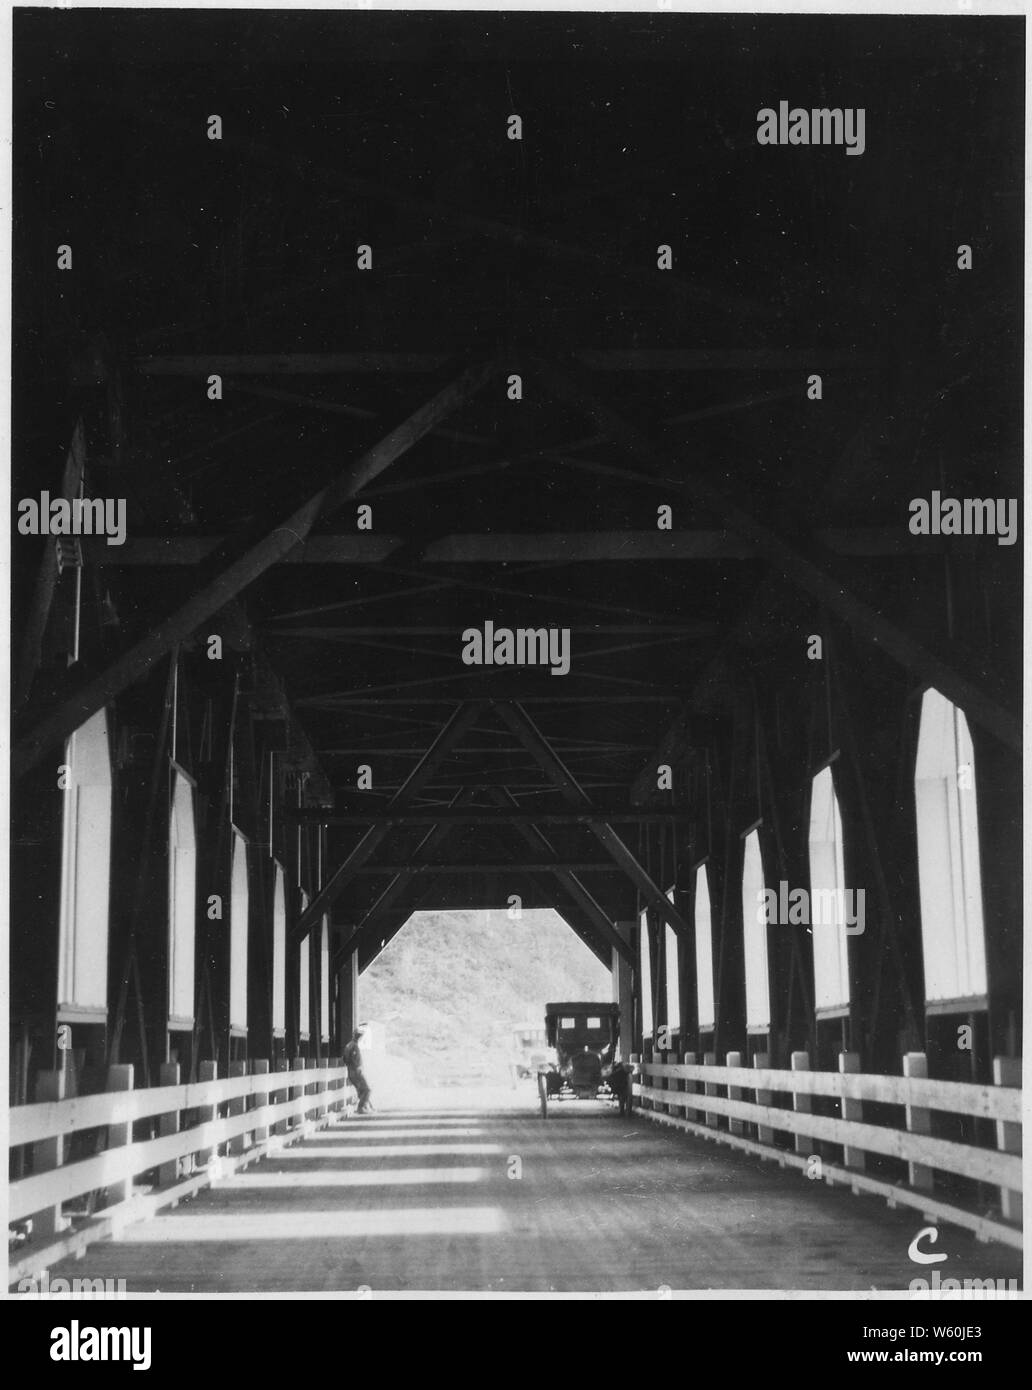 Alsea River Bridge, Station 60, Section 9. Looking through spans from South end. Shows stiff construction and well lighted roadway.; Scope and content:  Alsea River Forest Highway, Alsea River and Scott Creek Bridges. Stock Photo